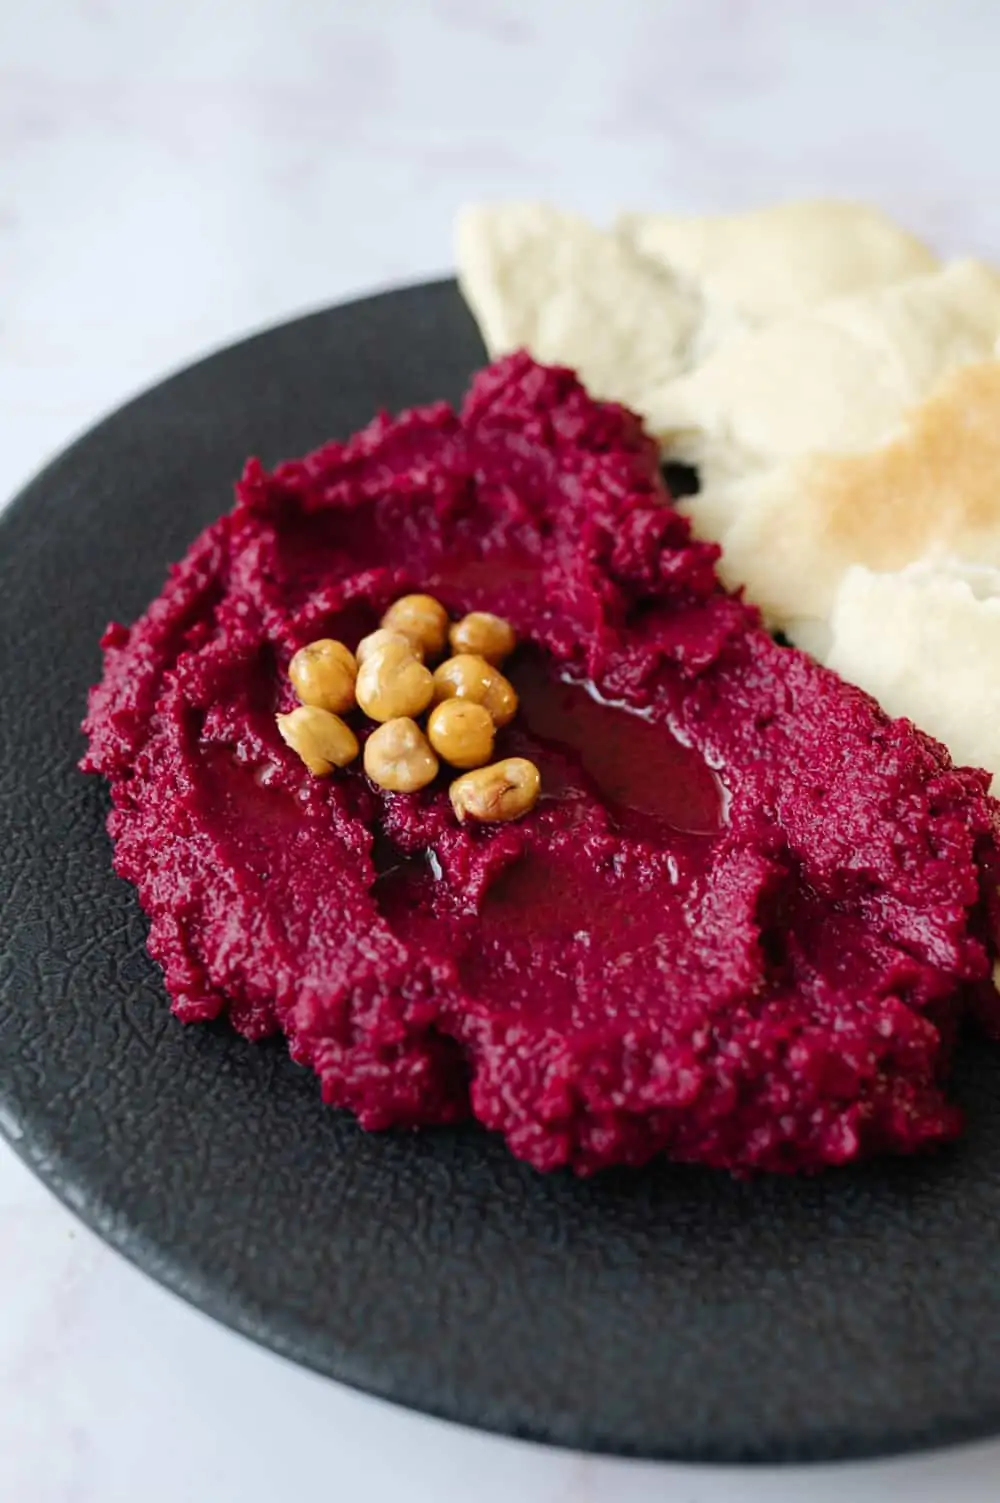 Black plate with a pile of roasted beetroot dip on one half and some flatbread on the other half.